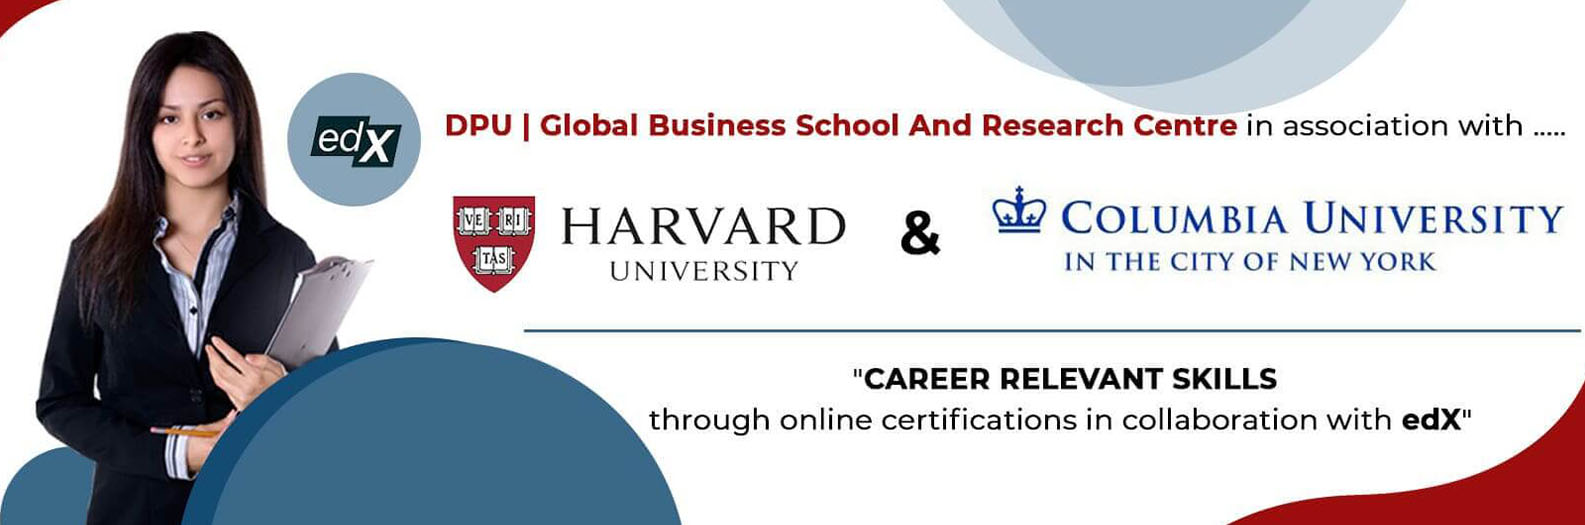 Career Relevant Skills through online certifications in collaboration with edX